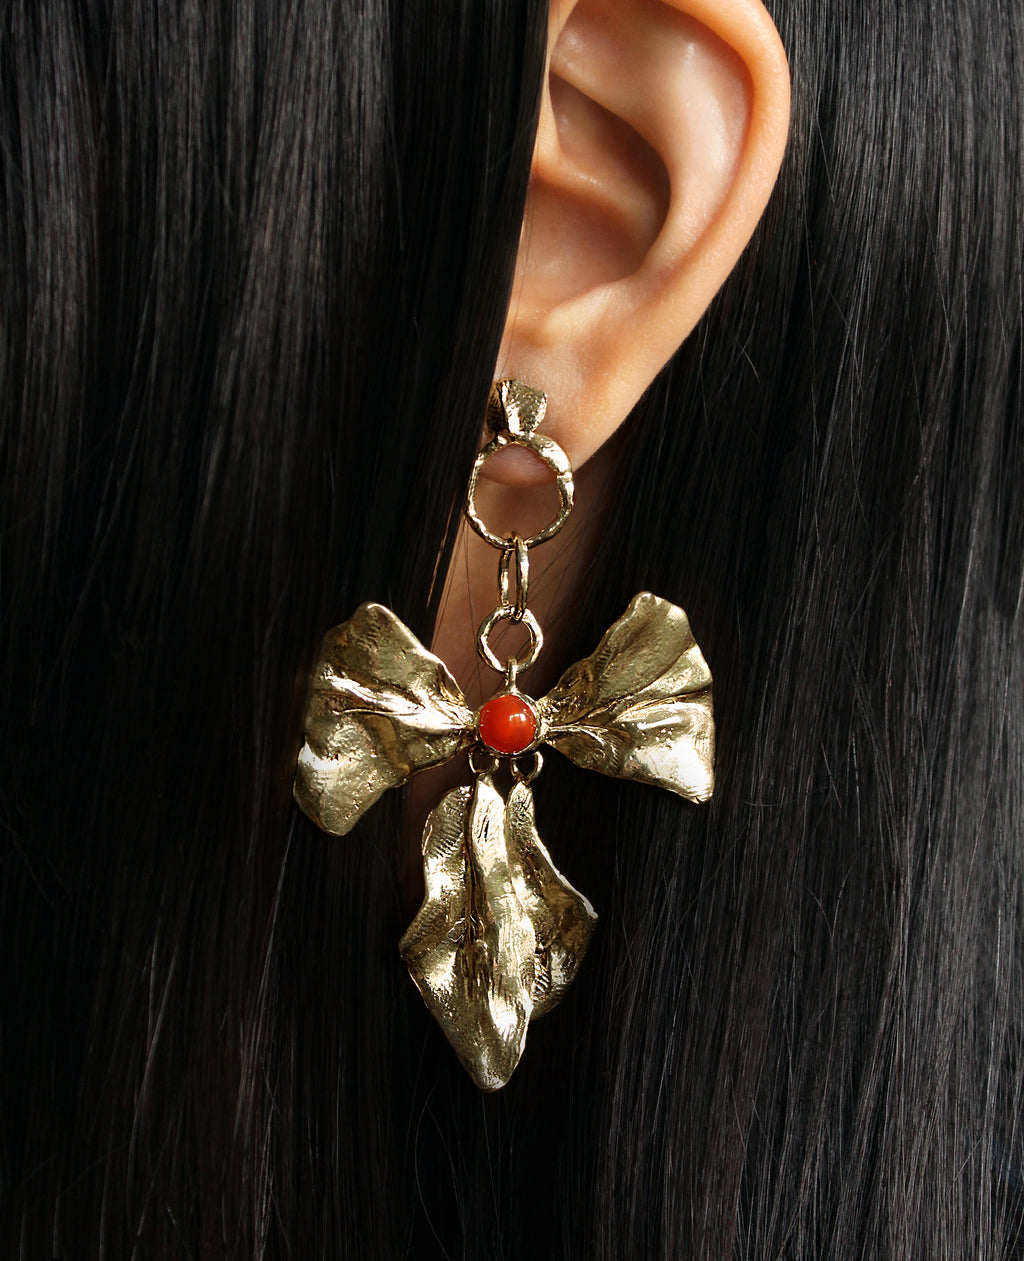 REIGN BOW // earrings with carnelian - ORA-C jewelry - handmade jewelry by Montreal based independent designer Caroline Pham